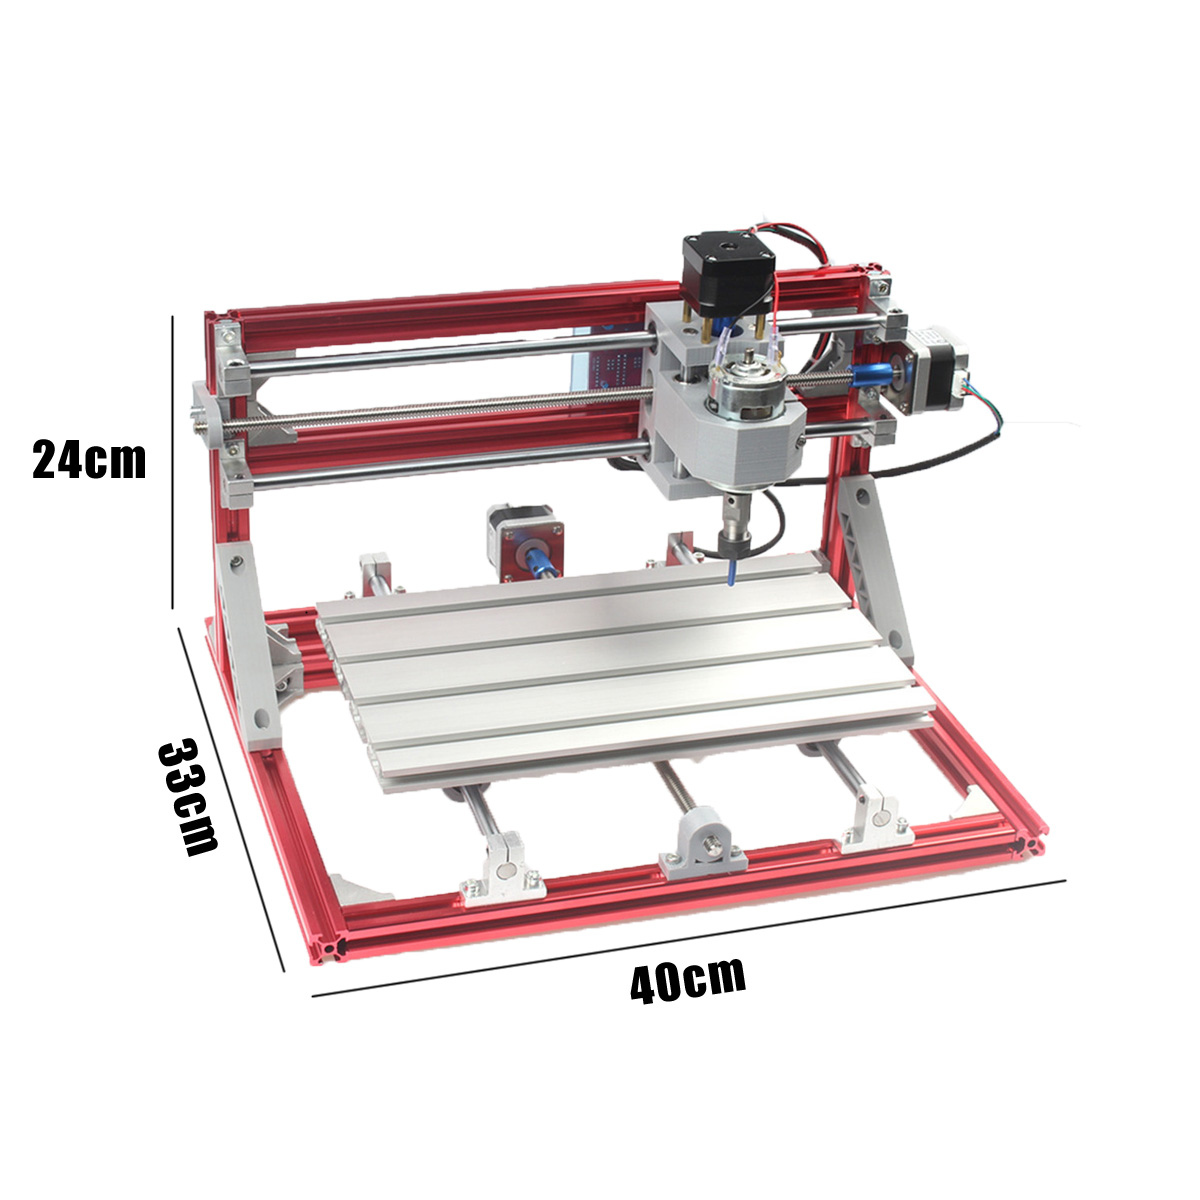 3018-3-Axis-Red-CNC-Wood-Engraving-Carving-PCB-Milling-Machine-Router-Engraver-GRBLControl-1412004